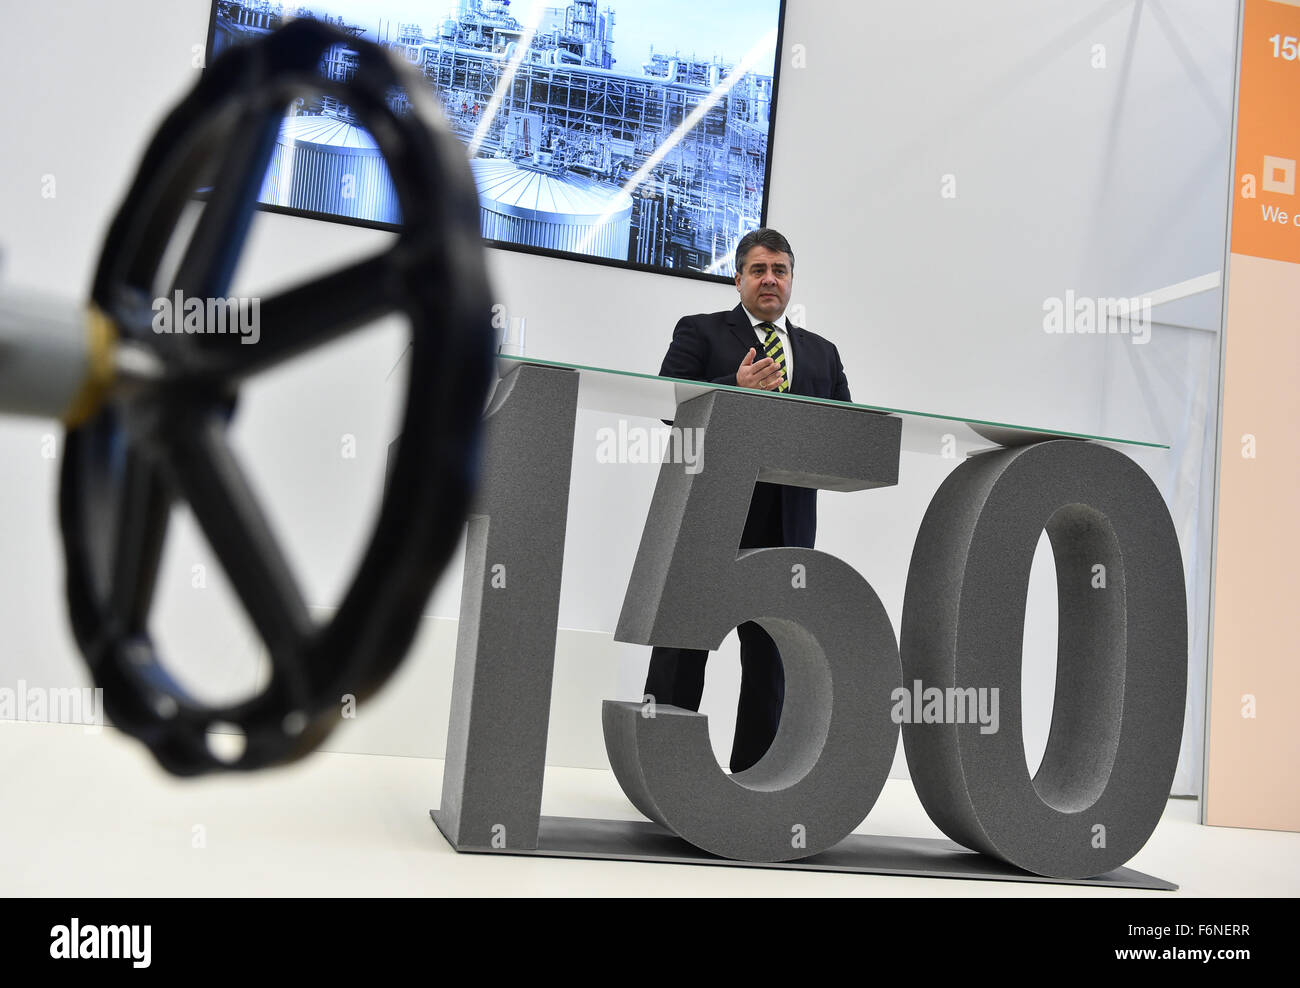 Ludwigshafen, Germany. 17th Nov, 2015. German Economy Minister Sigmar Gabriel (SPD) speaks during the inauguration of chemical company BASF's new production facility for Toluene diisocyanate (TDI) in Ludwigshafen, Germany, 17 November 2015. Photo: Uwe Anspach/dpa/Alamy Live News Stock Photo